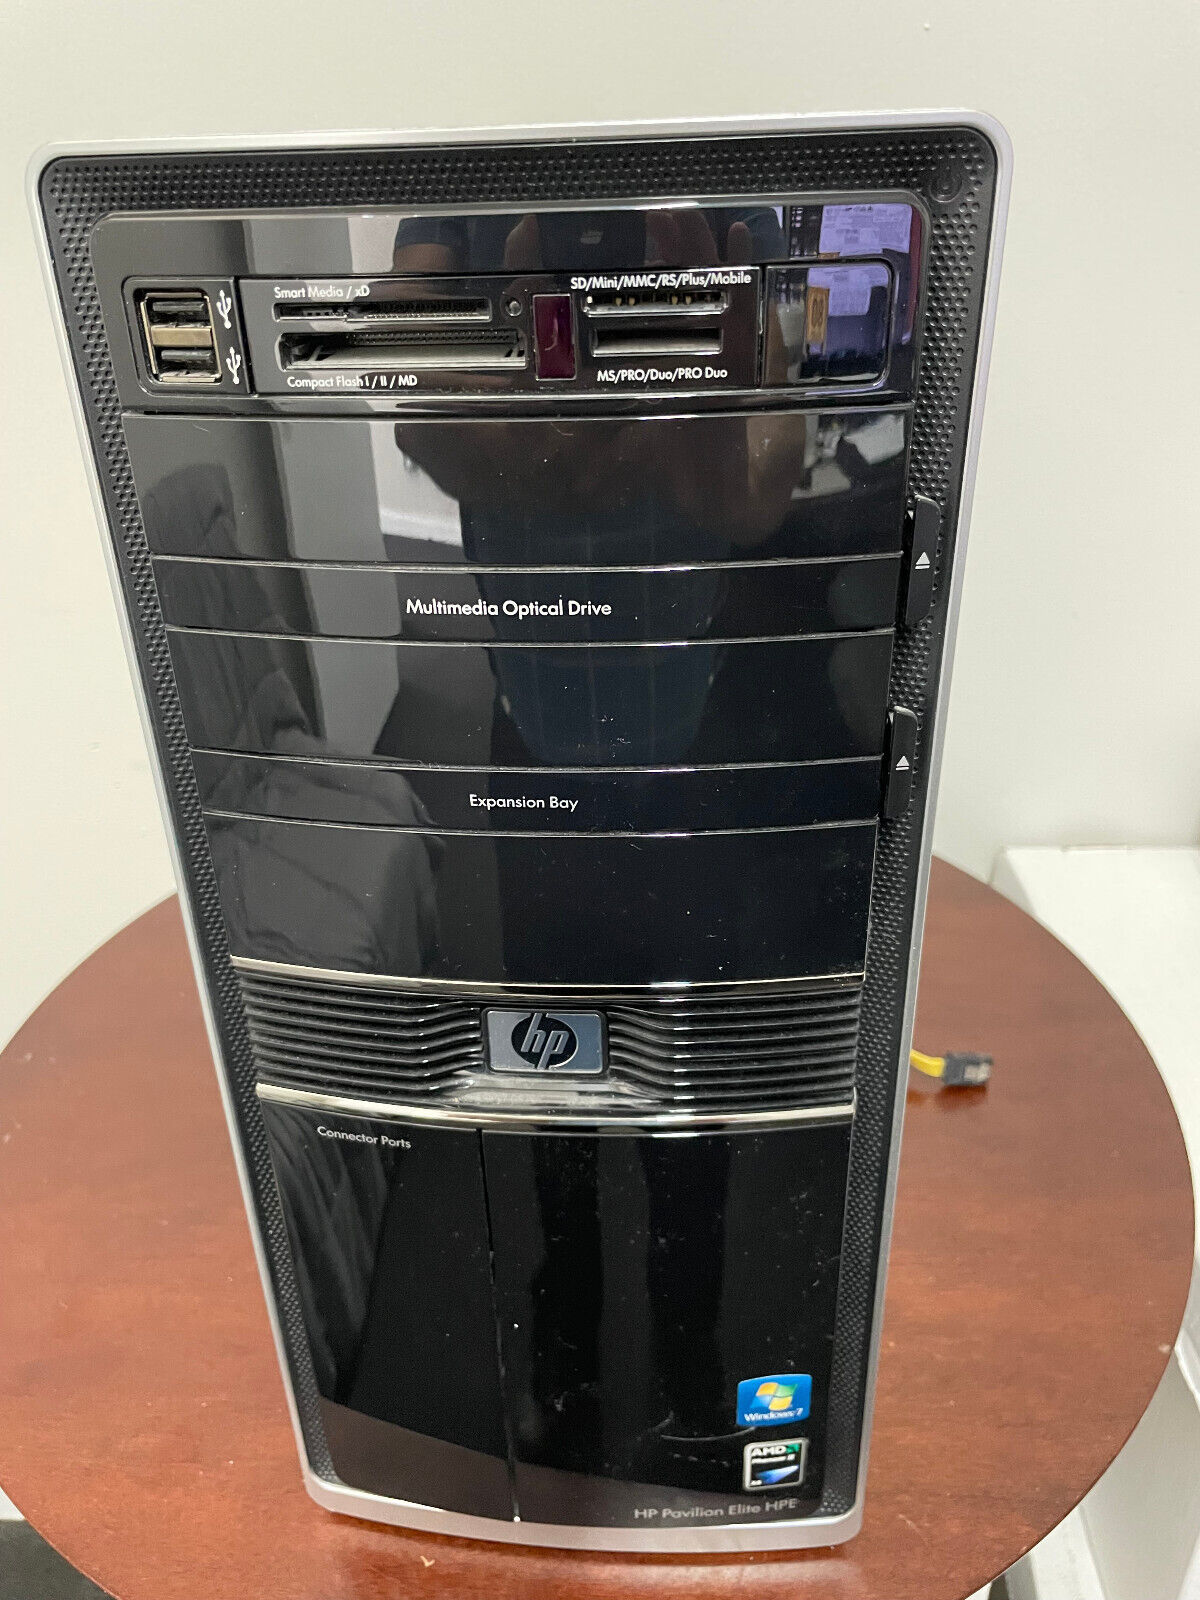 HP Pavilion Elite HPE-210Y Desktop included Win 10 Home Activated